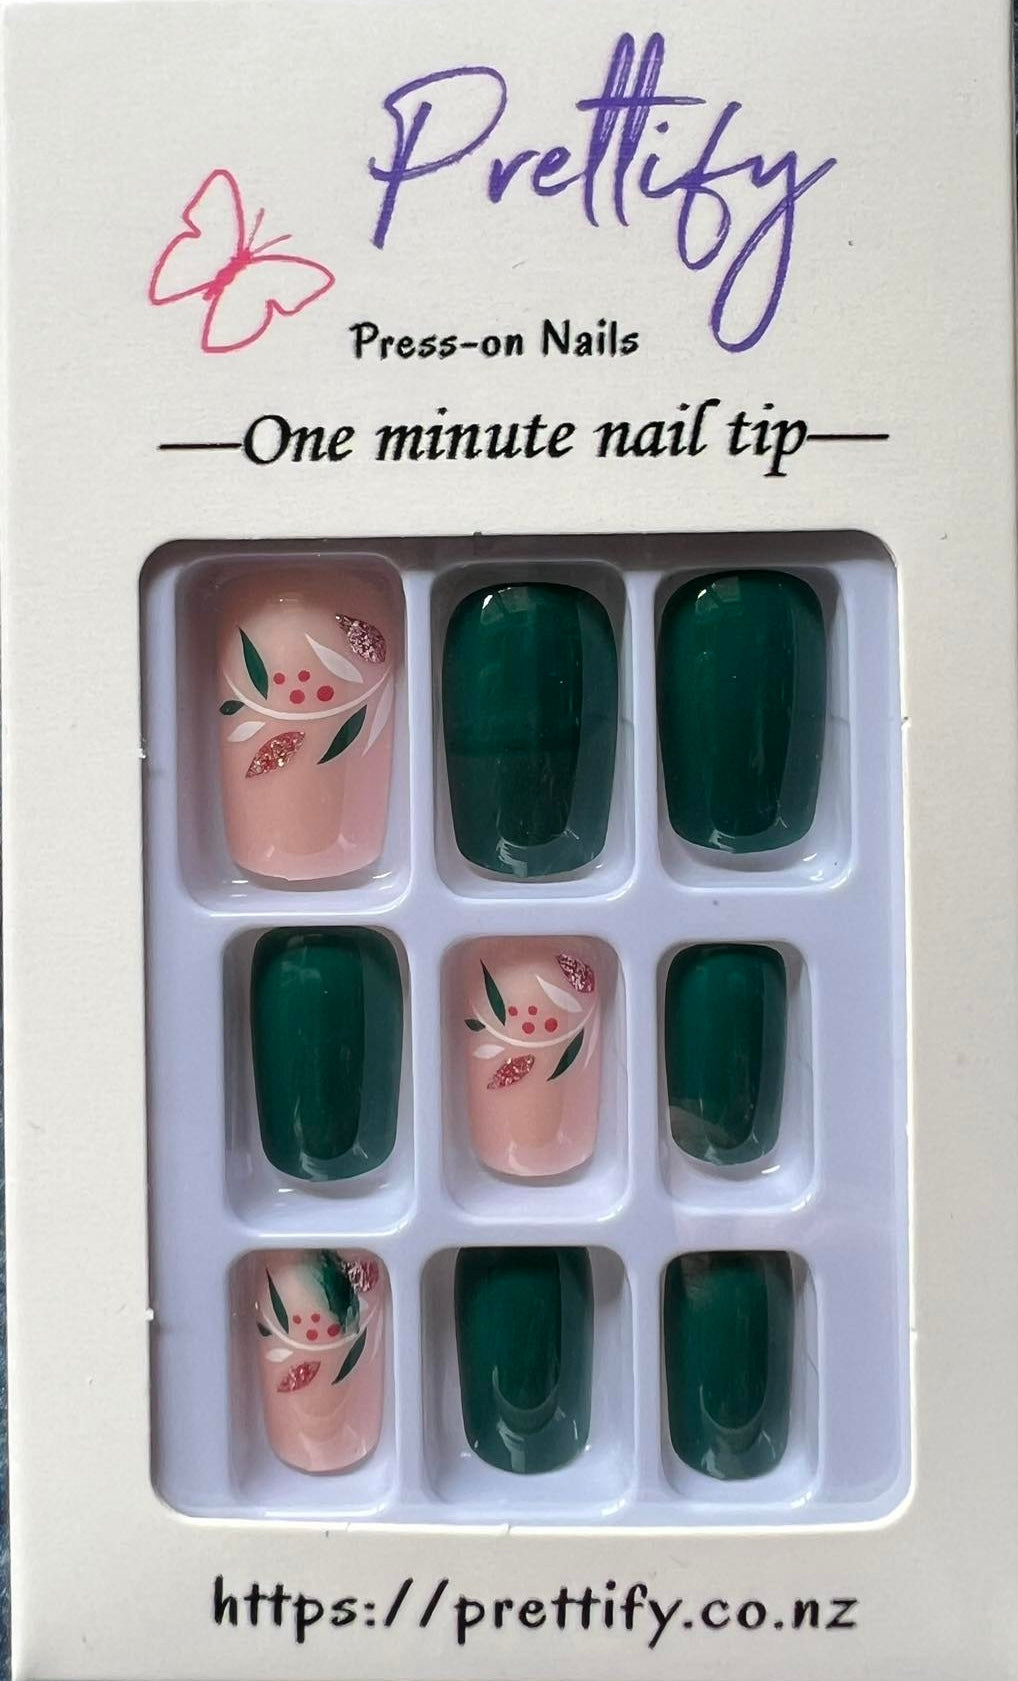 Squoval Press on Nails. Dark Green & Pale Pink with Leaves. Durable Acrylic Press on Nails. Easy and quick to apply. Great for those special occasions, parties or add an edge to any outfit. Gorgeous, flattering and you can re-use them again and again.